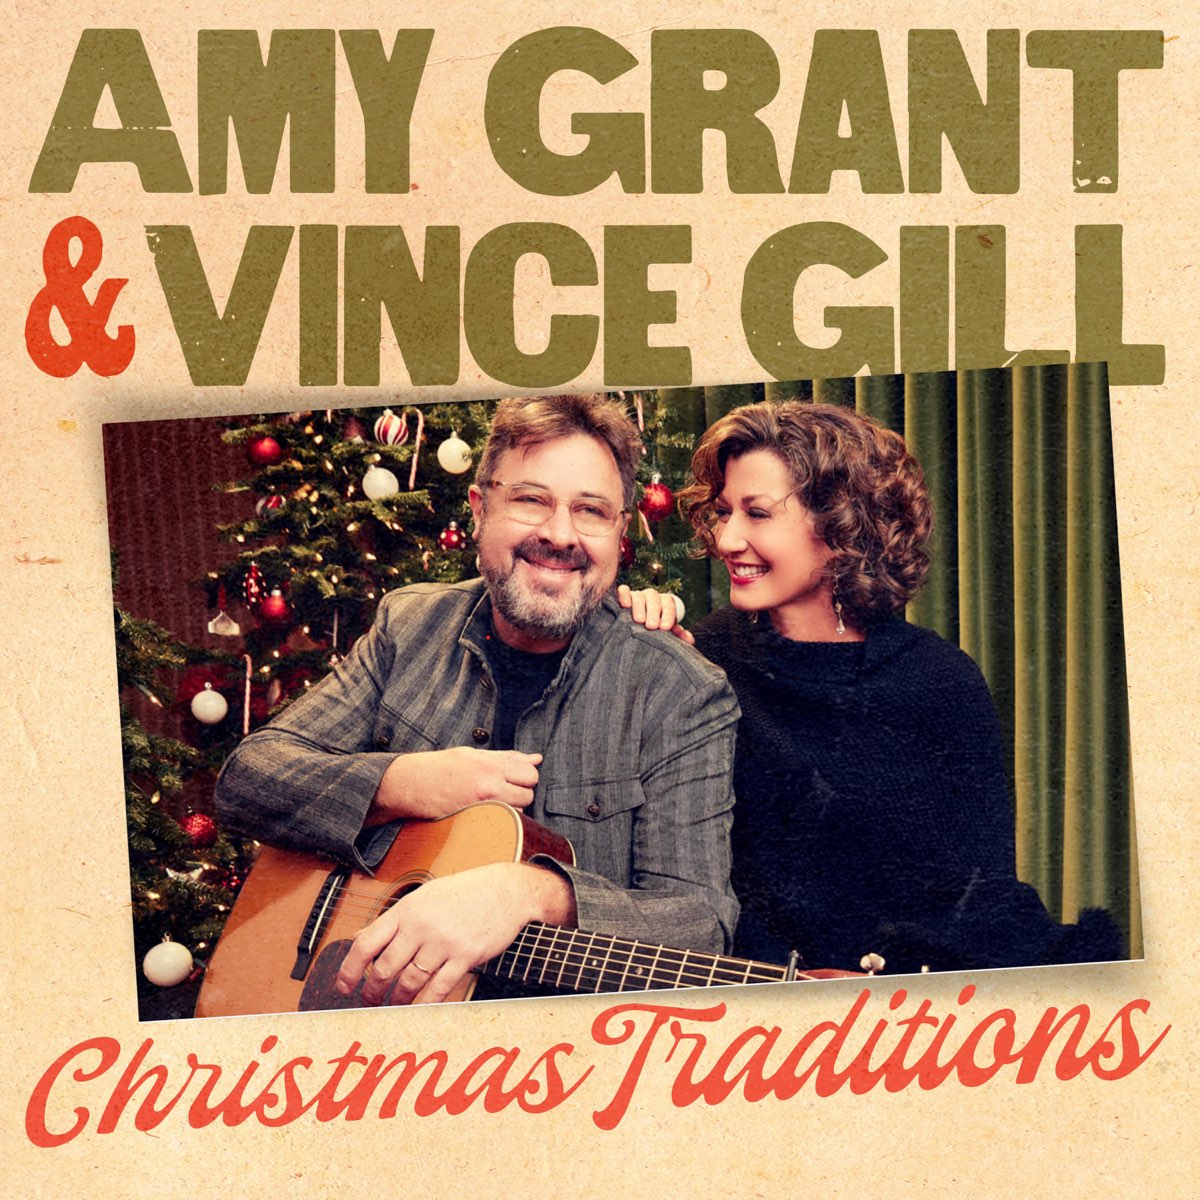 ‎Christmas Traditions by Amy Grant & Vince Gill on Apple Music